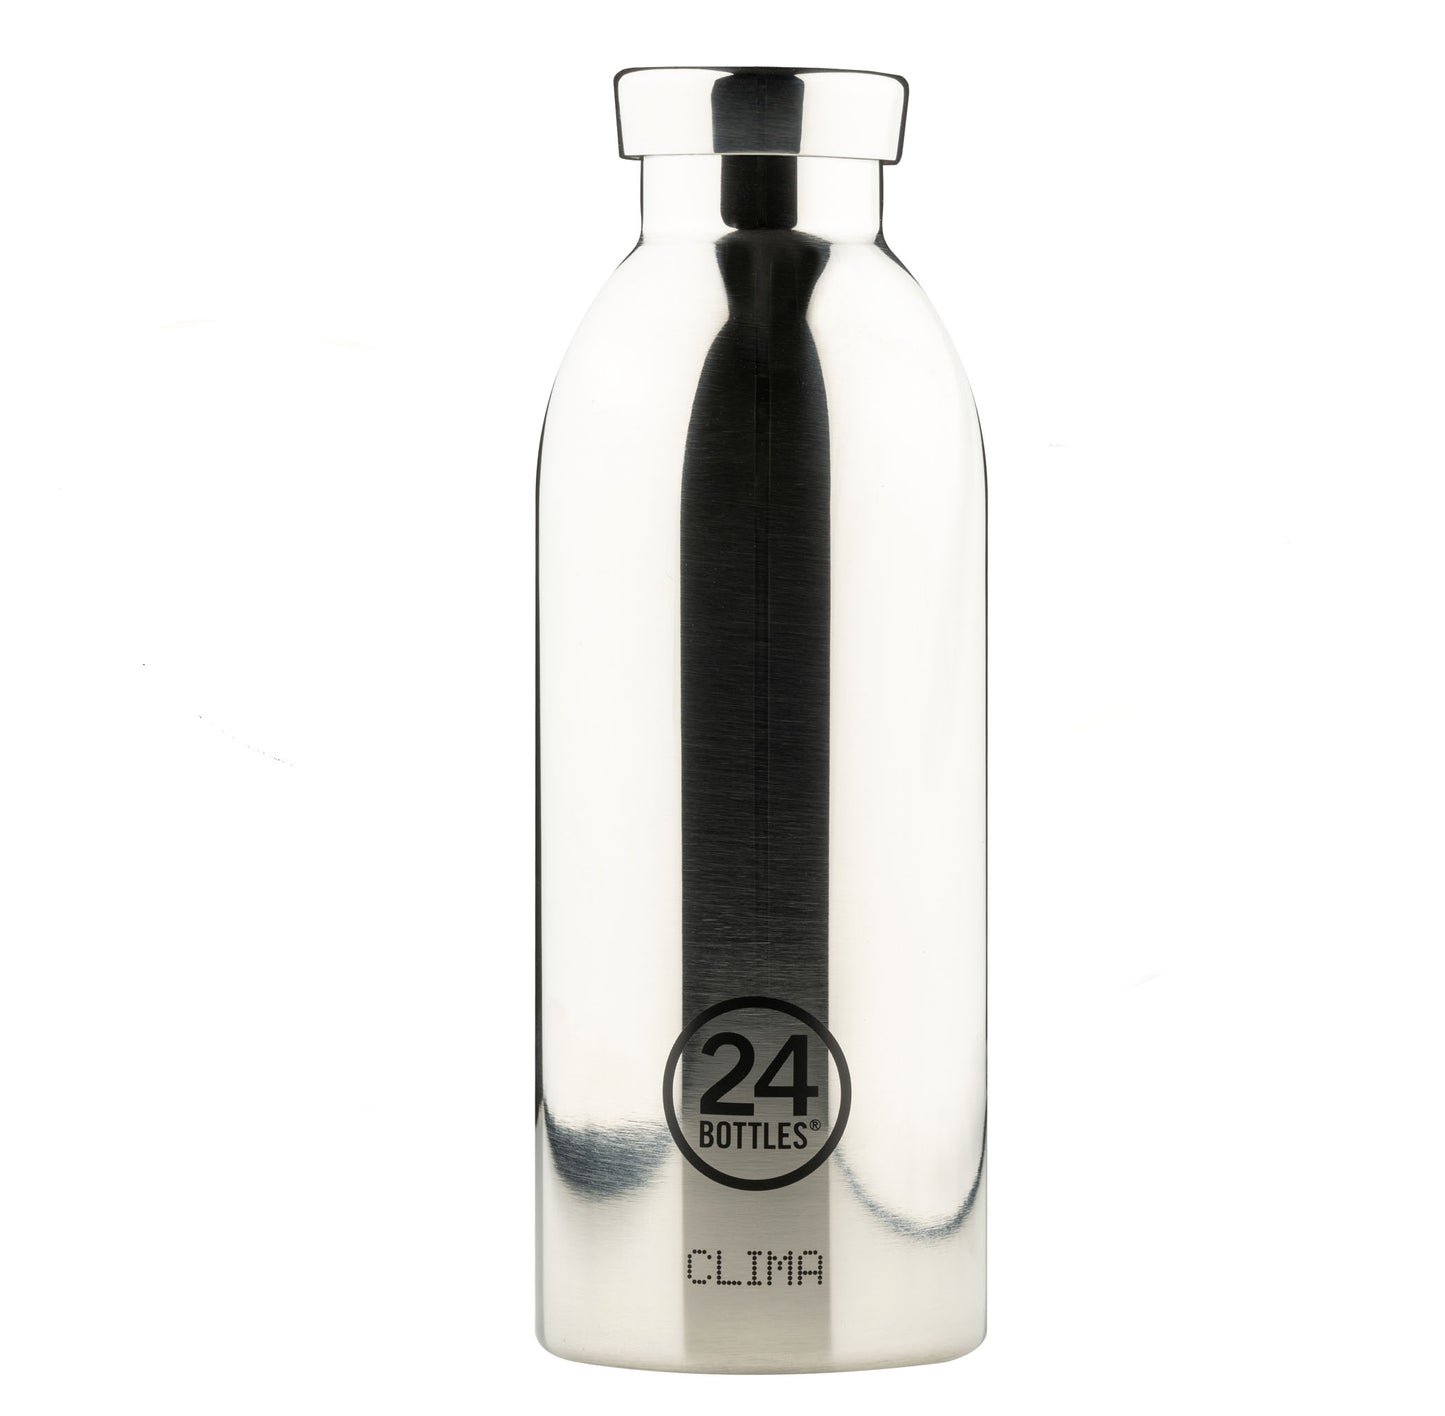 Clima Bottle 24H COLD AND 12H HOT